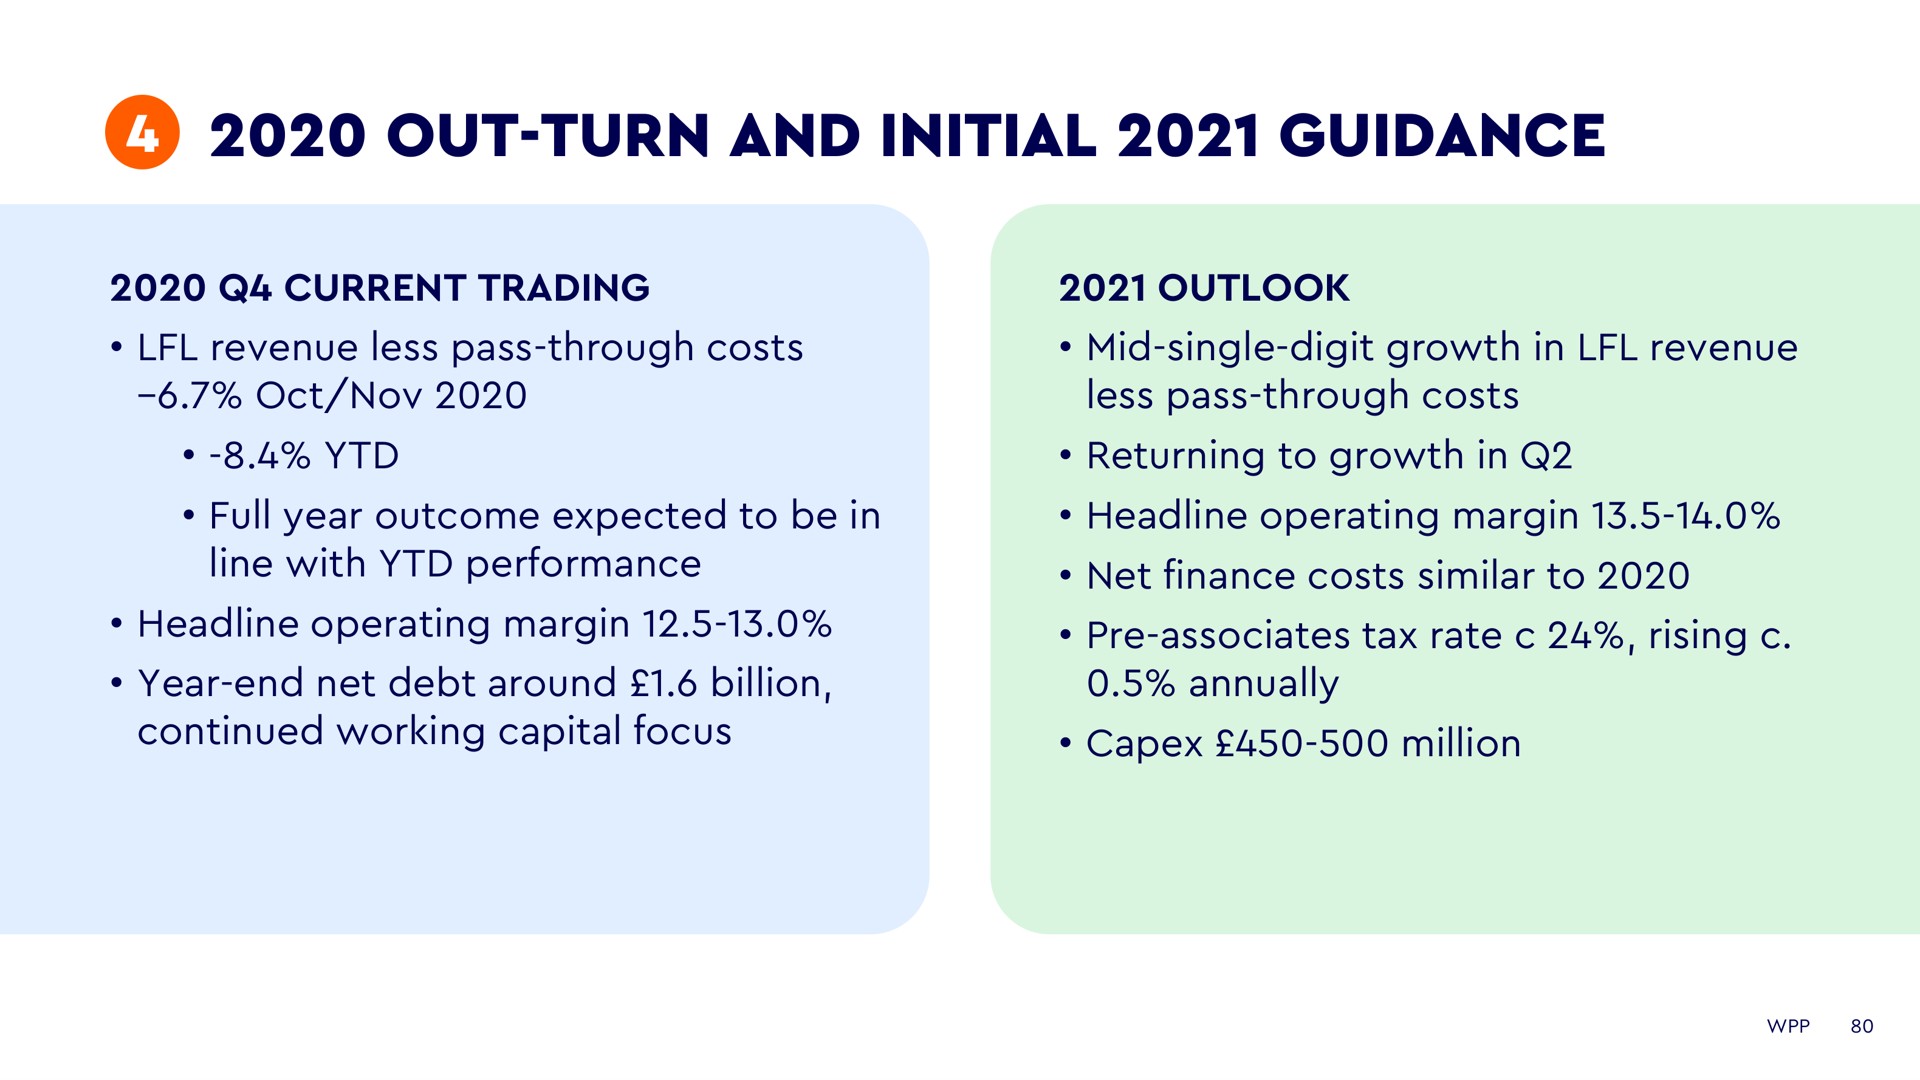 out turn and initial guidance | WPP